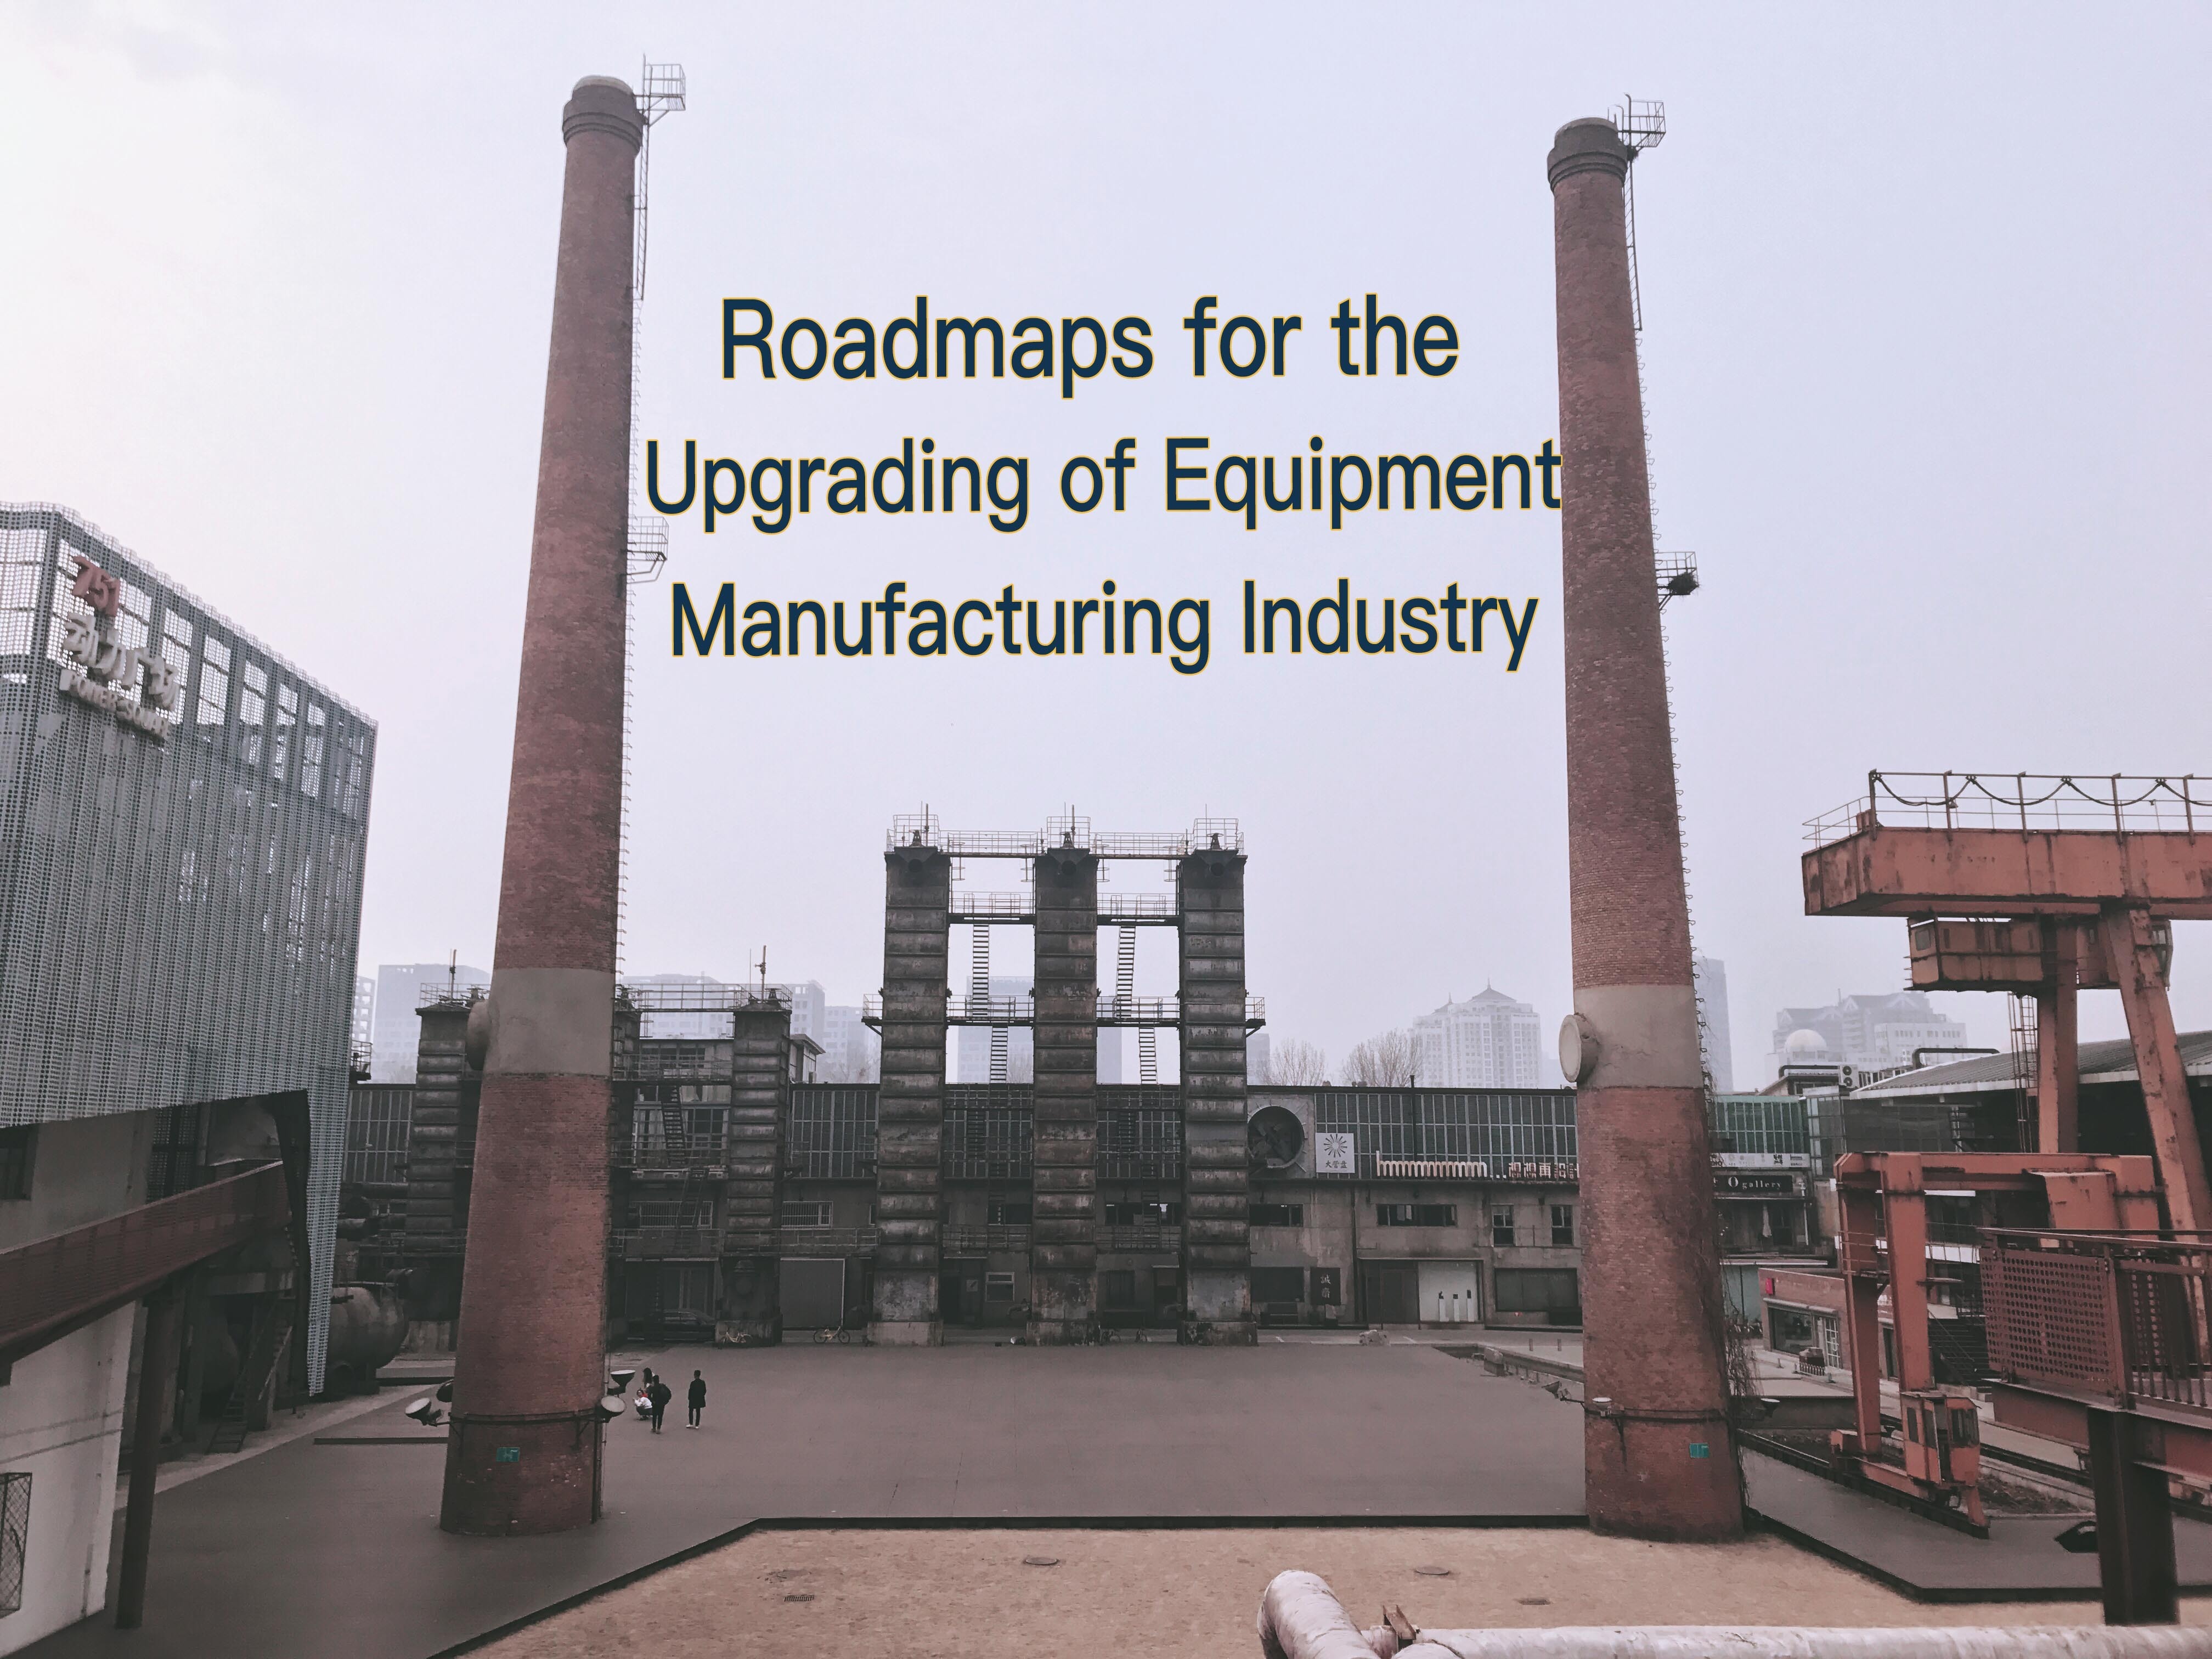 Roadmaps for the Upgrading of Equipment Manufacturing Industry